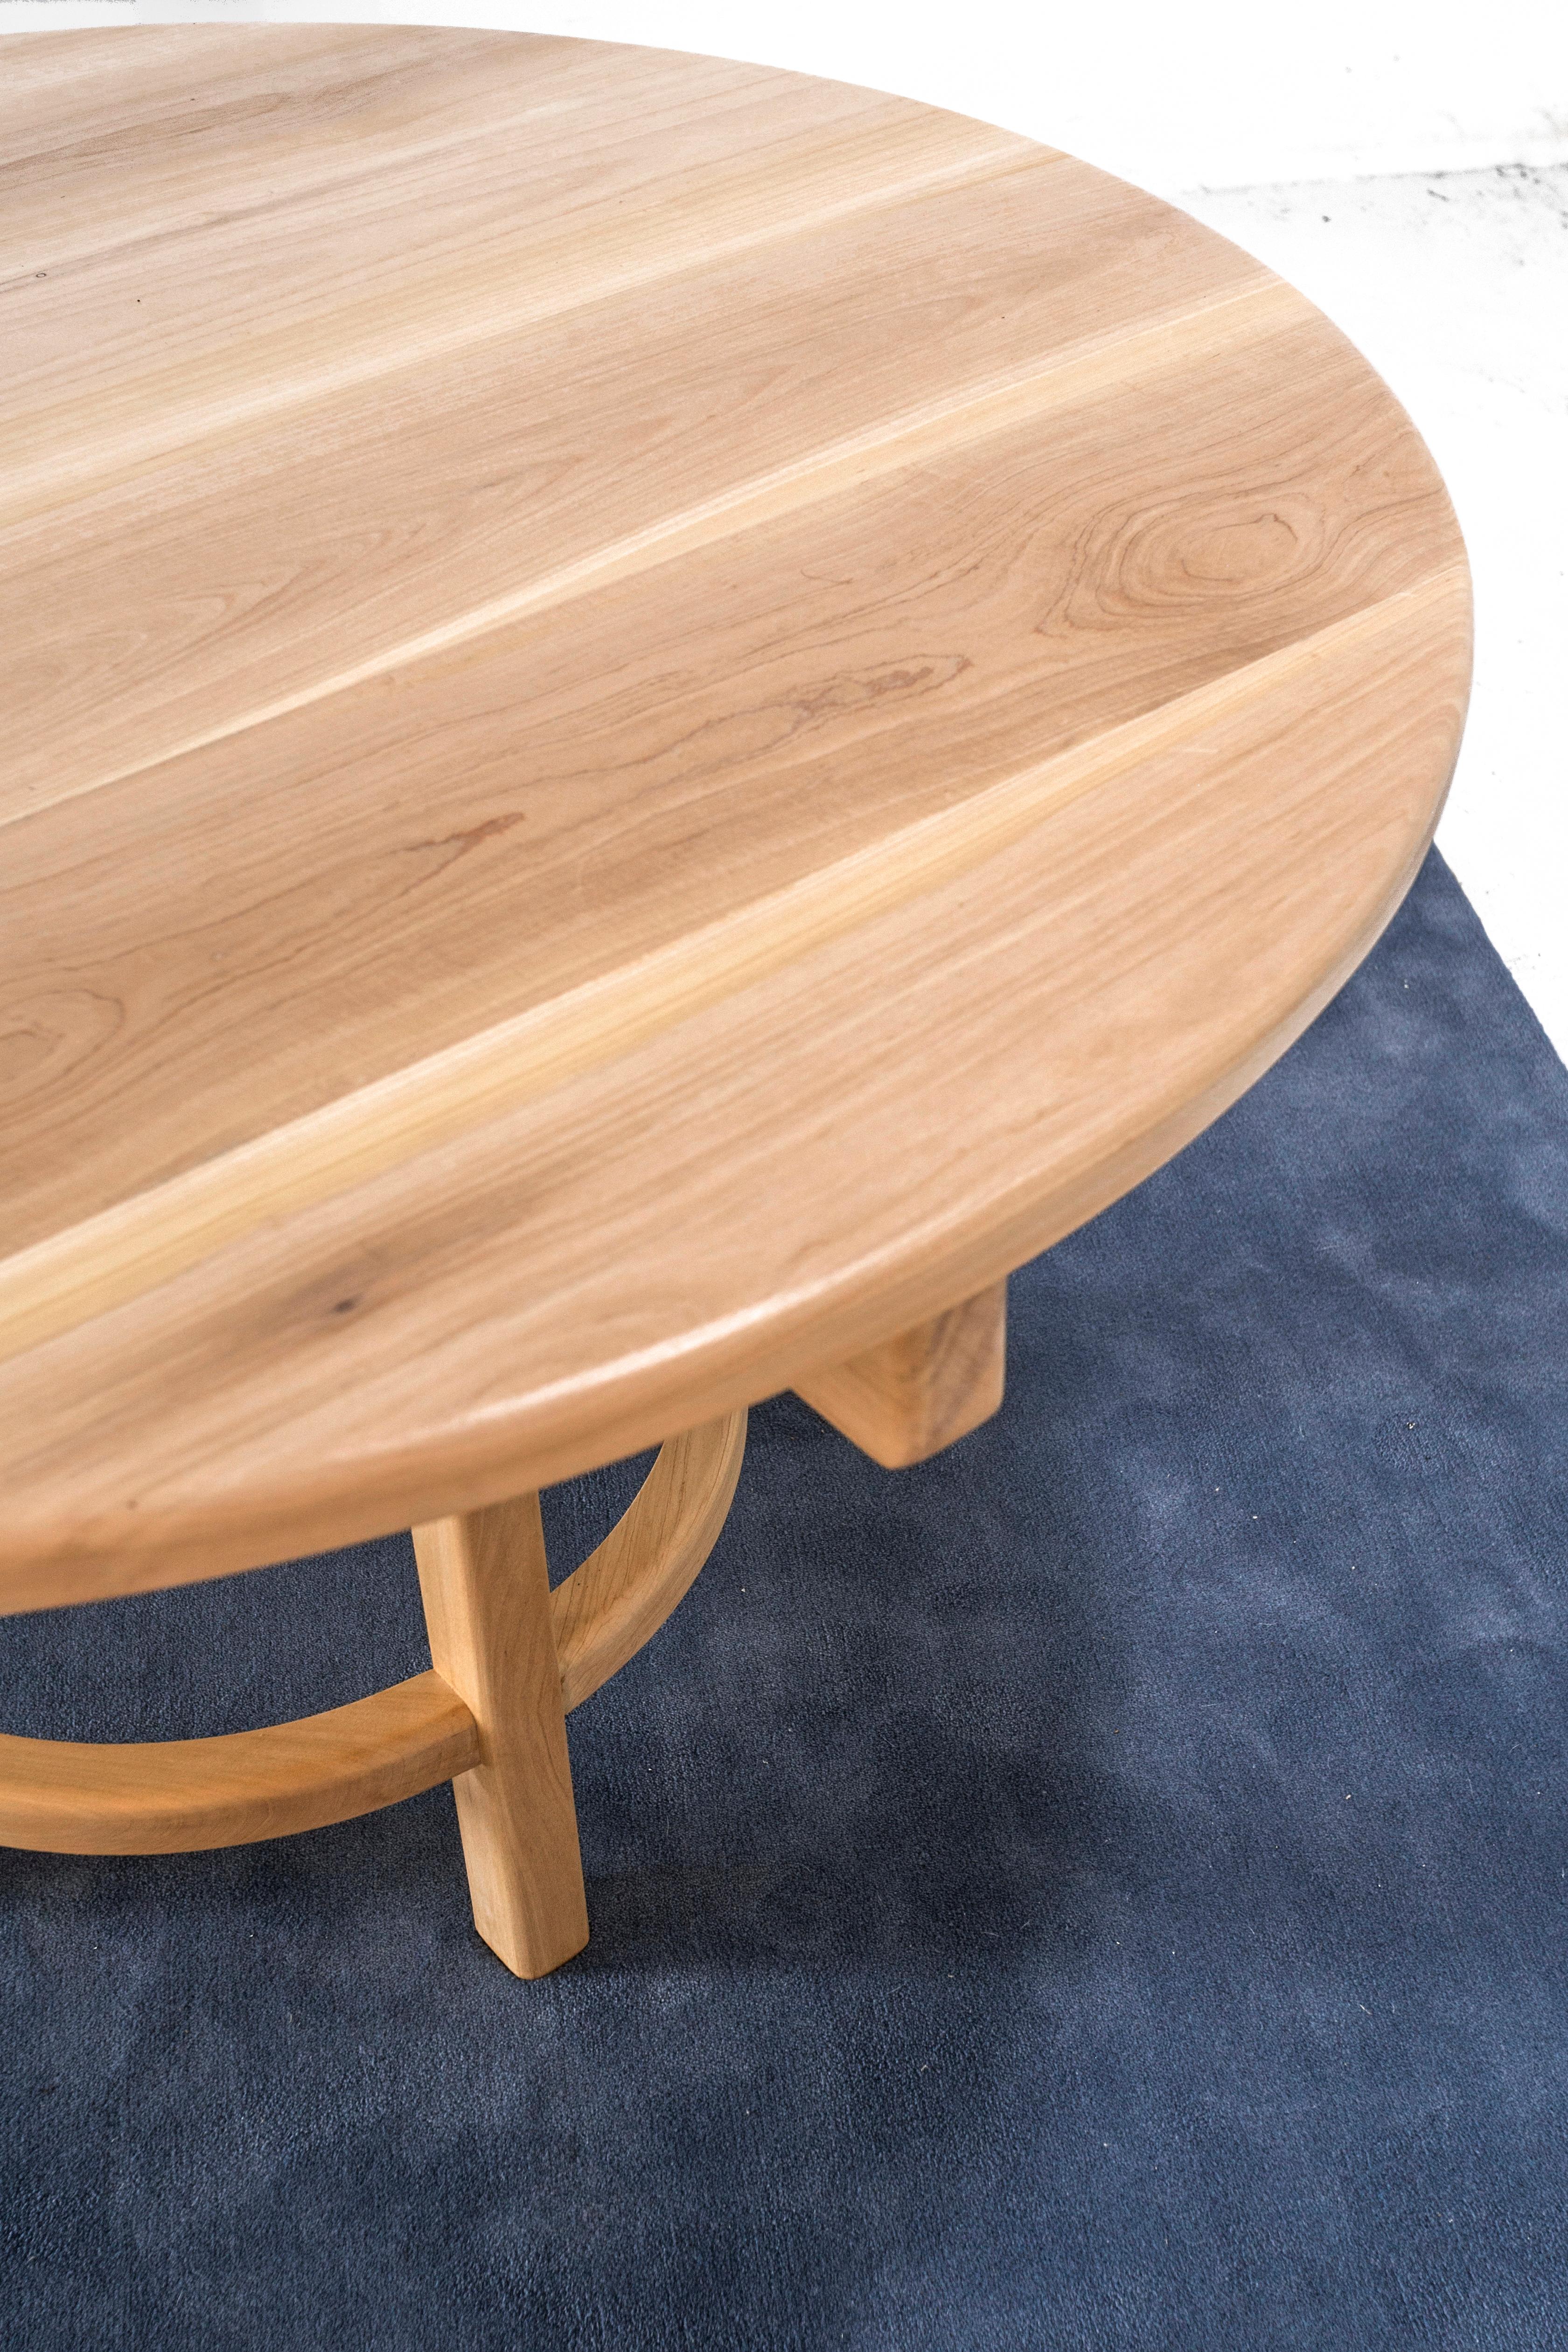 Wood Orno Round Dining Table by Ries For Sale